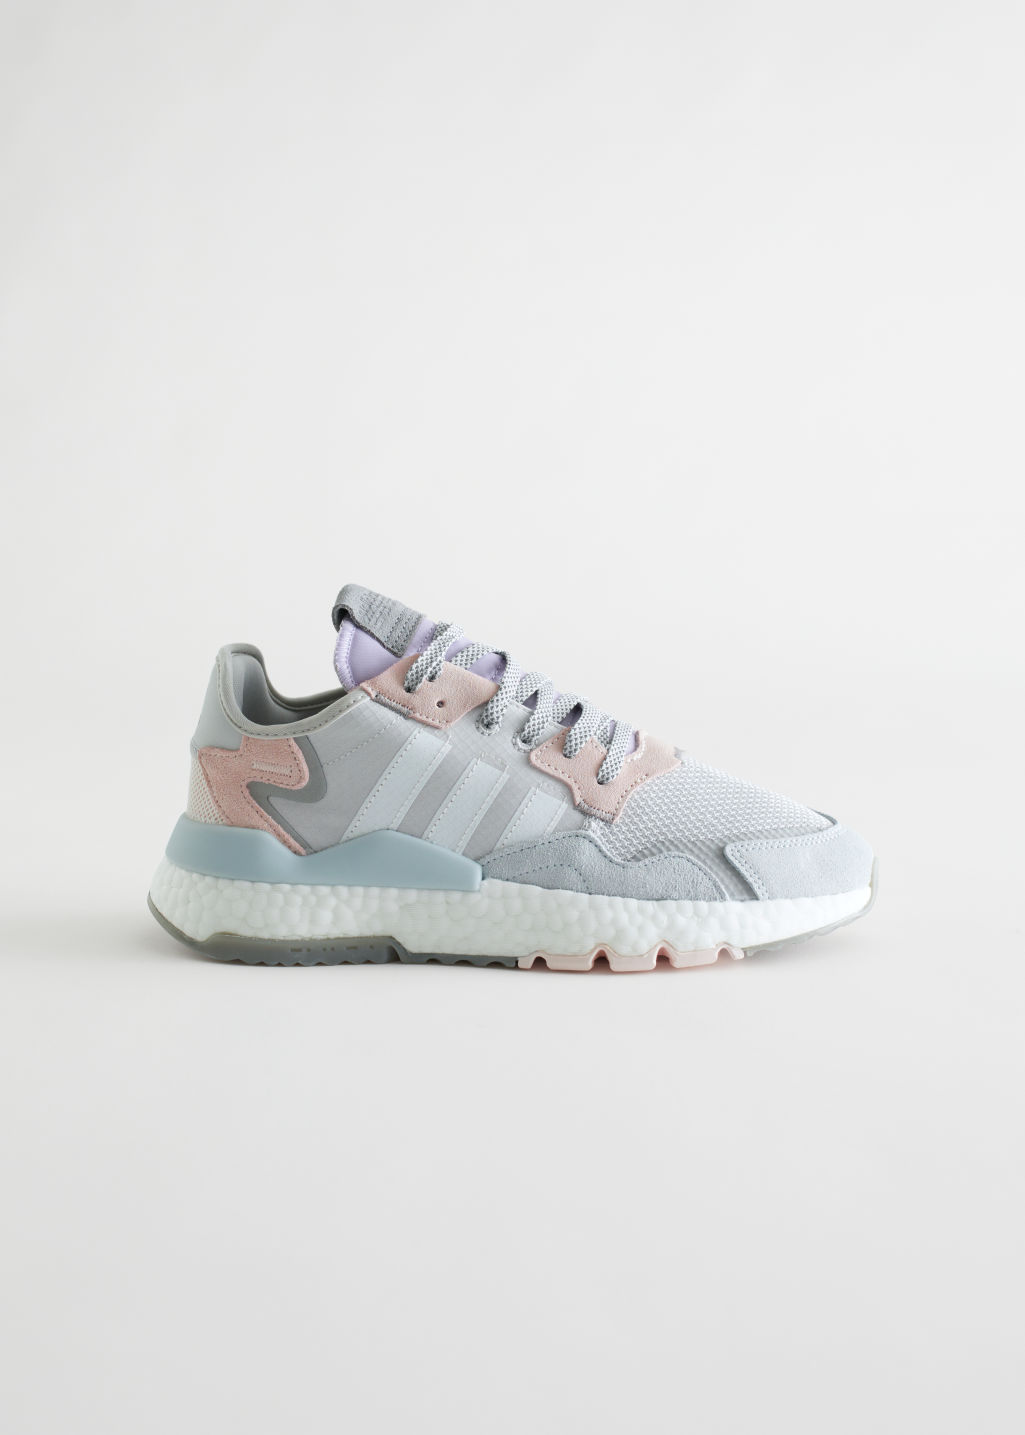 adidas Nite Jogger - Grey, Pink, White - Adidas - & Other Stories - Click Image to Close